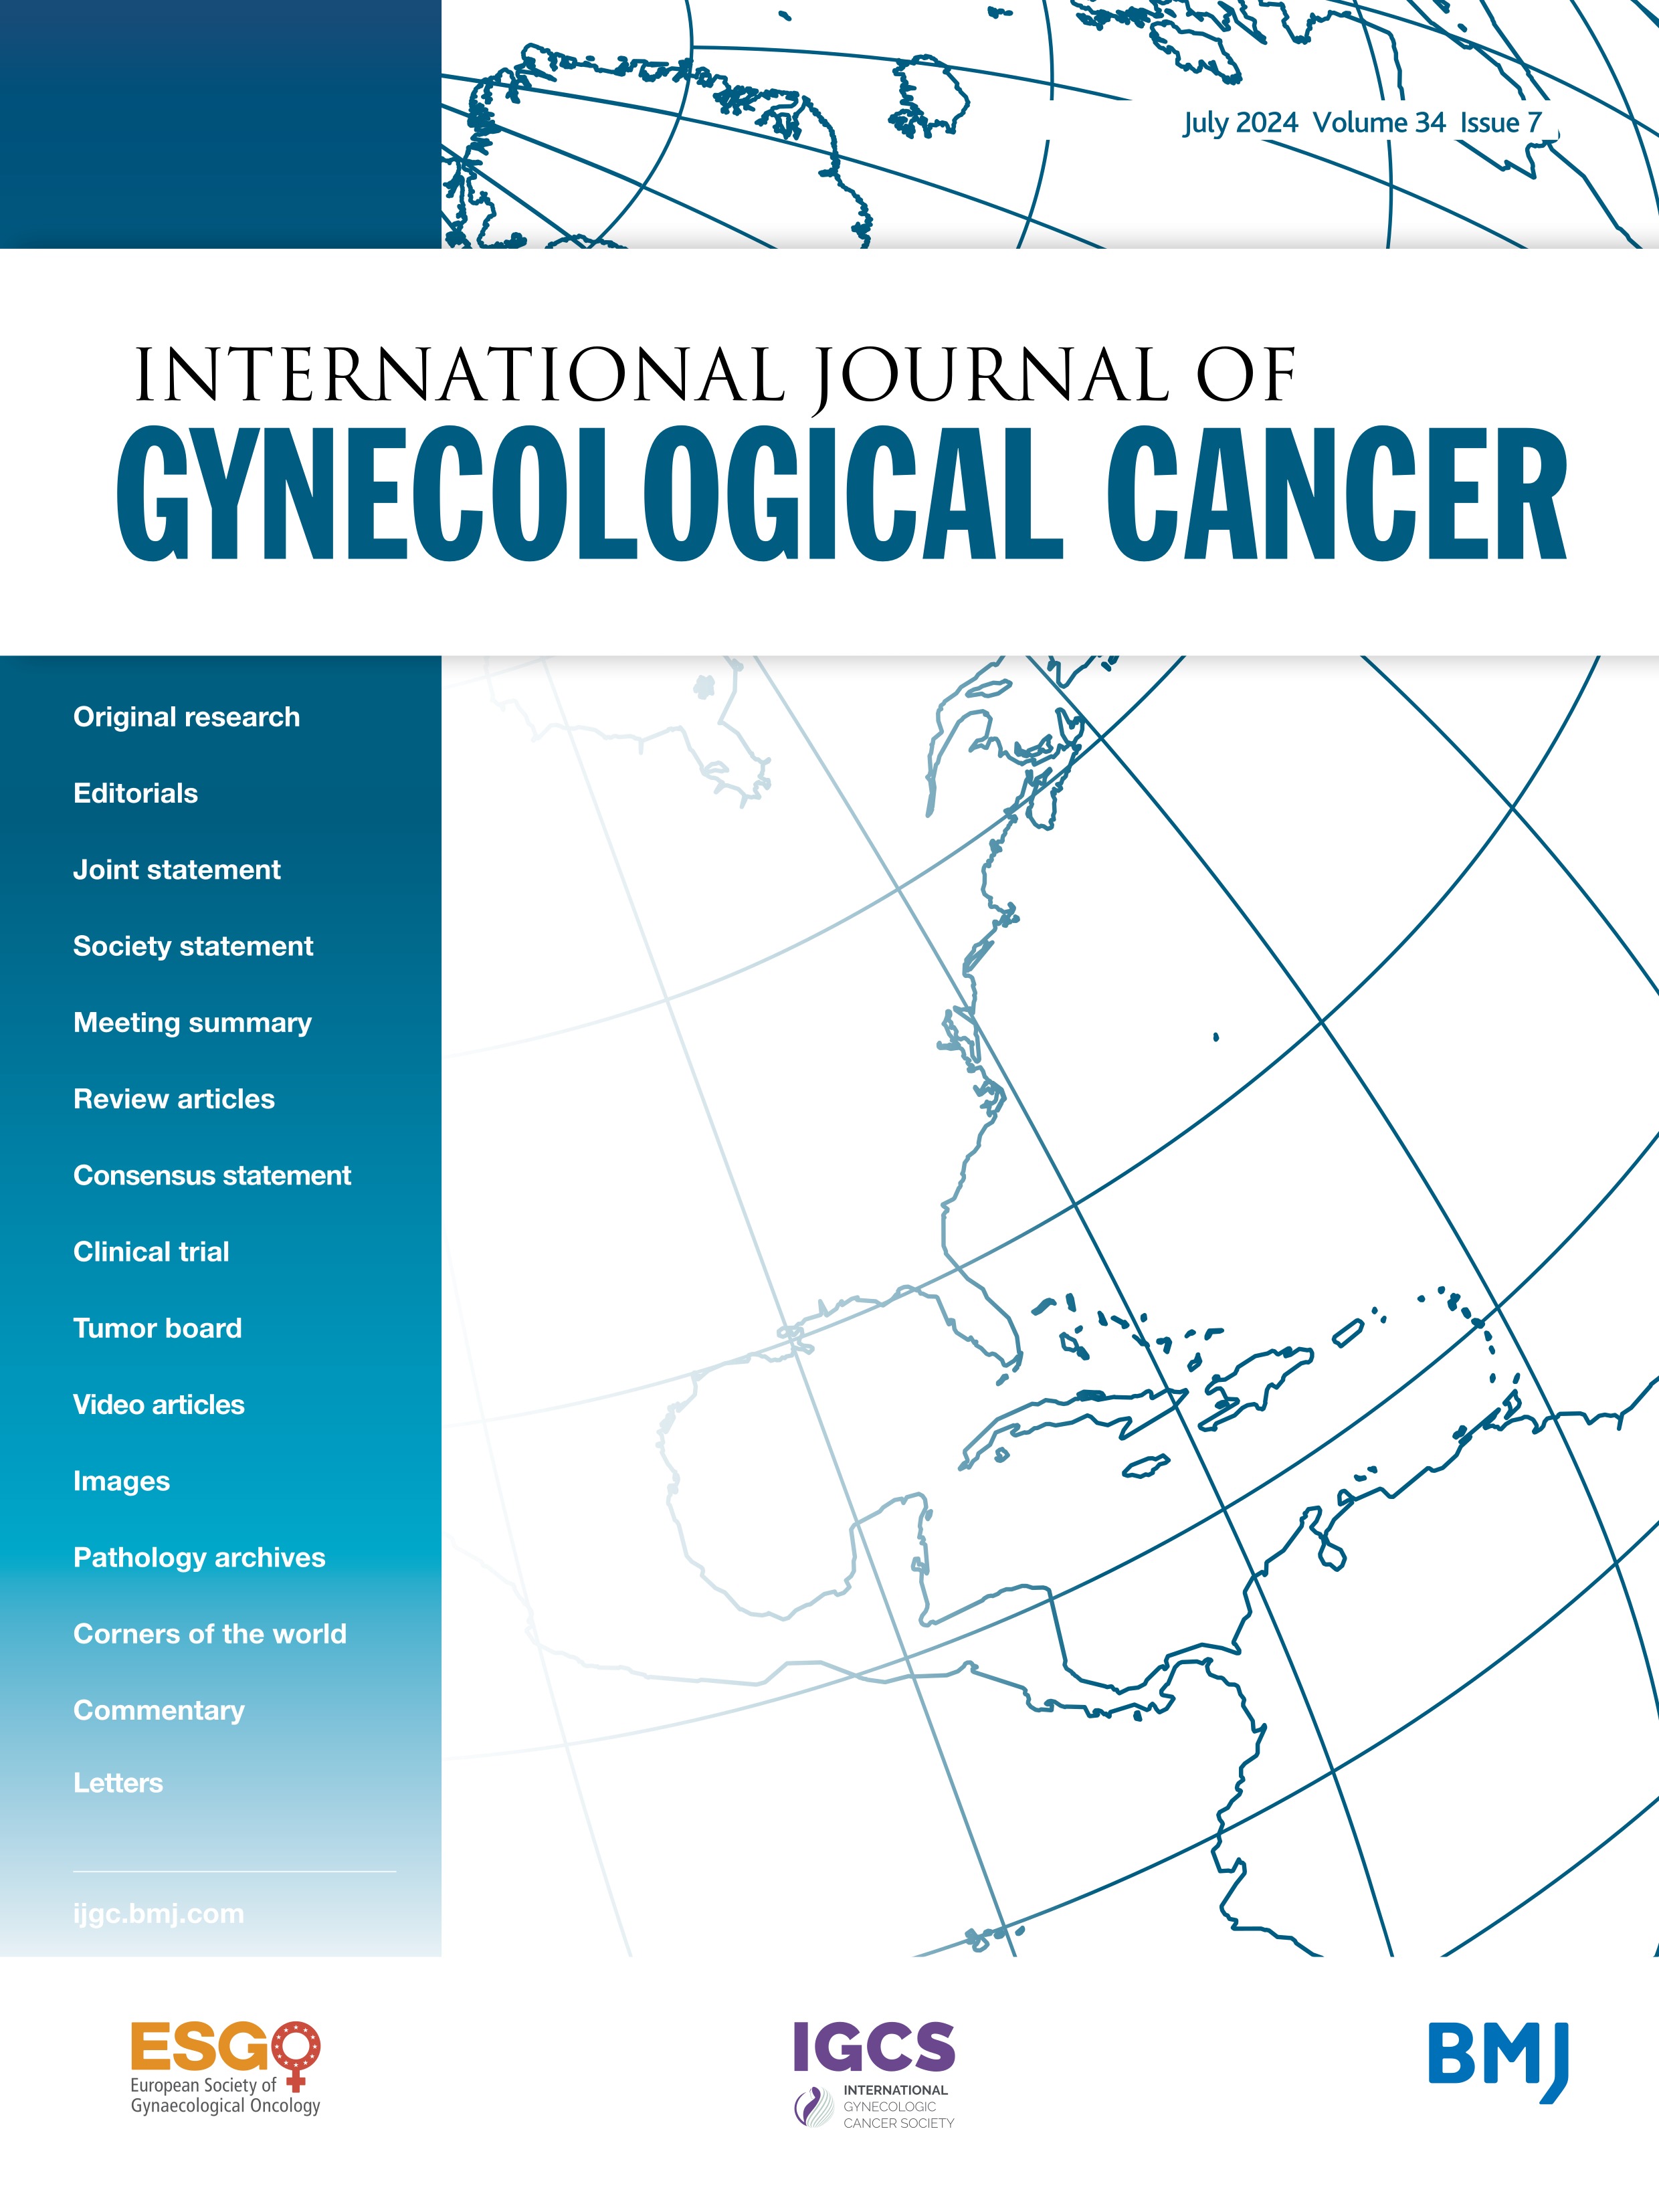 Patterns of use of primary and first-line chemotherapy for recurrence among patients with cervical cancer